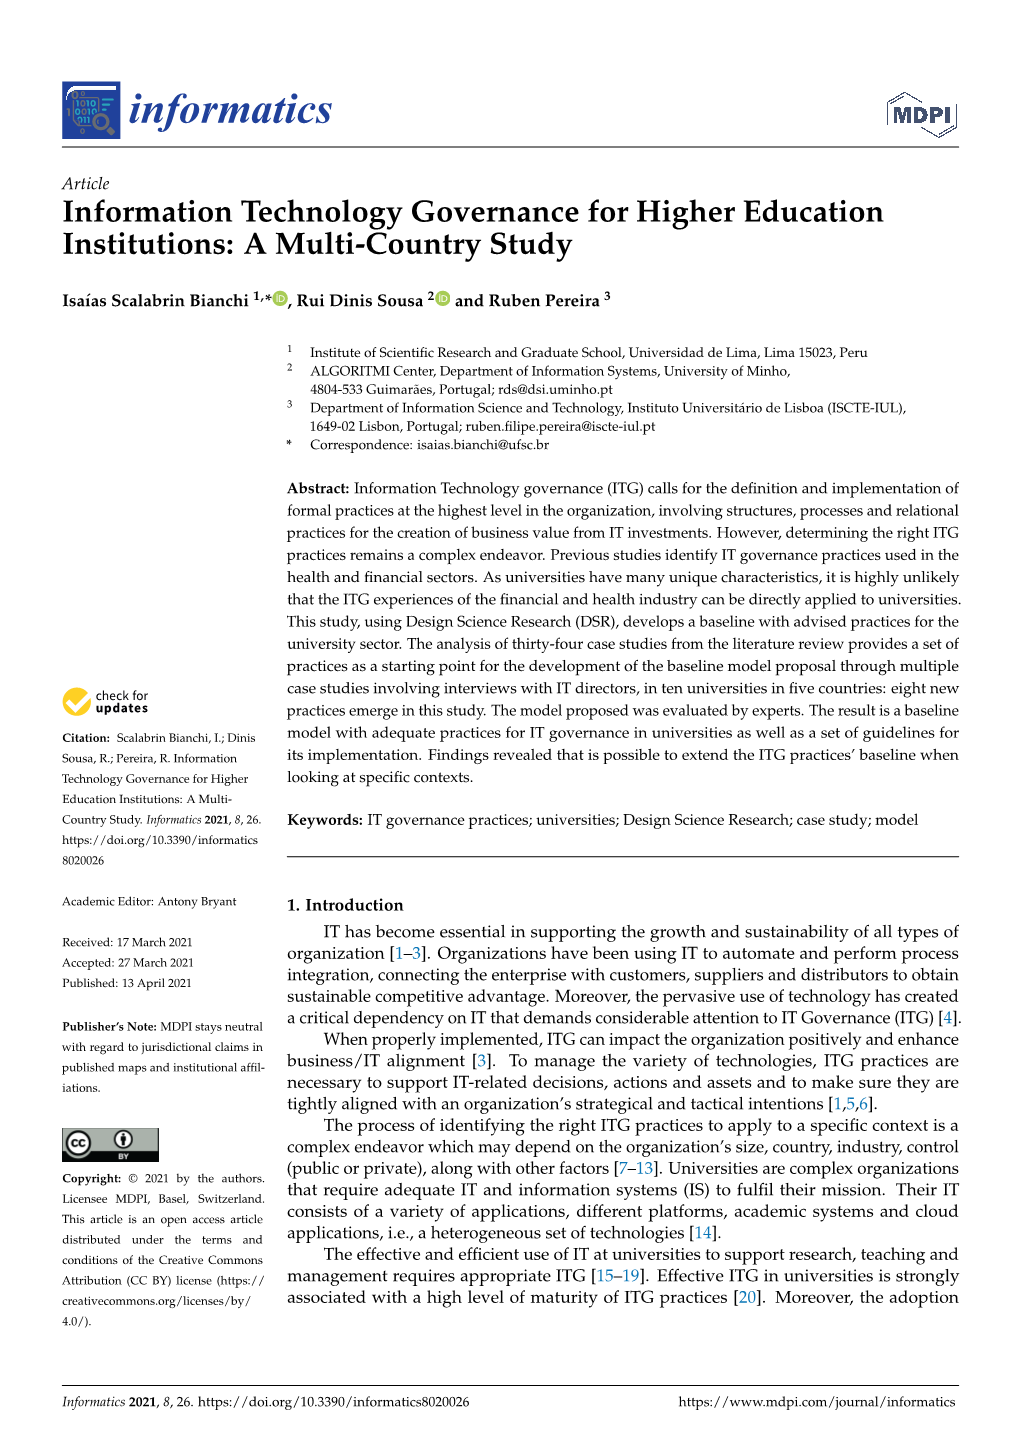 Information Technology Governance for Higher Education Institutions: a Multi-Country Study